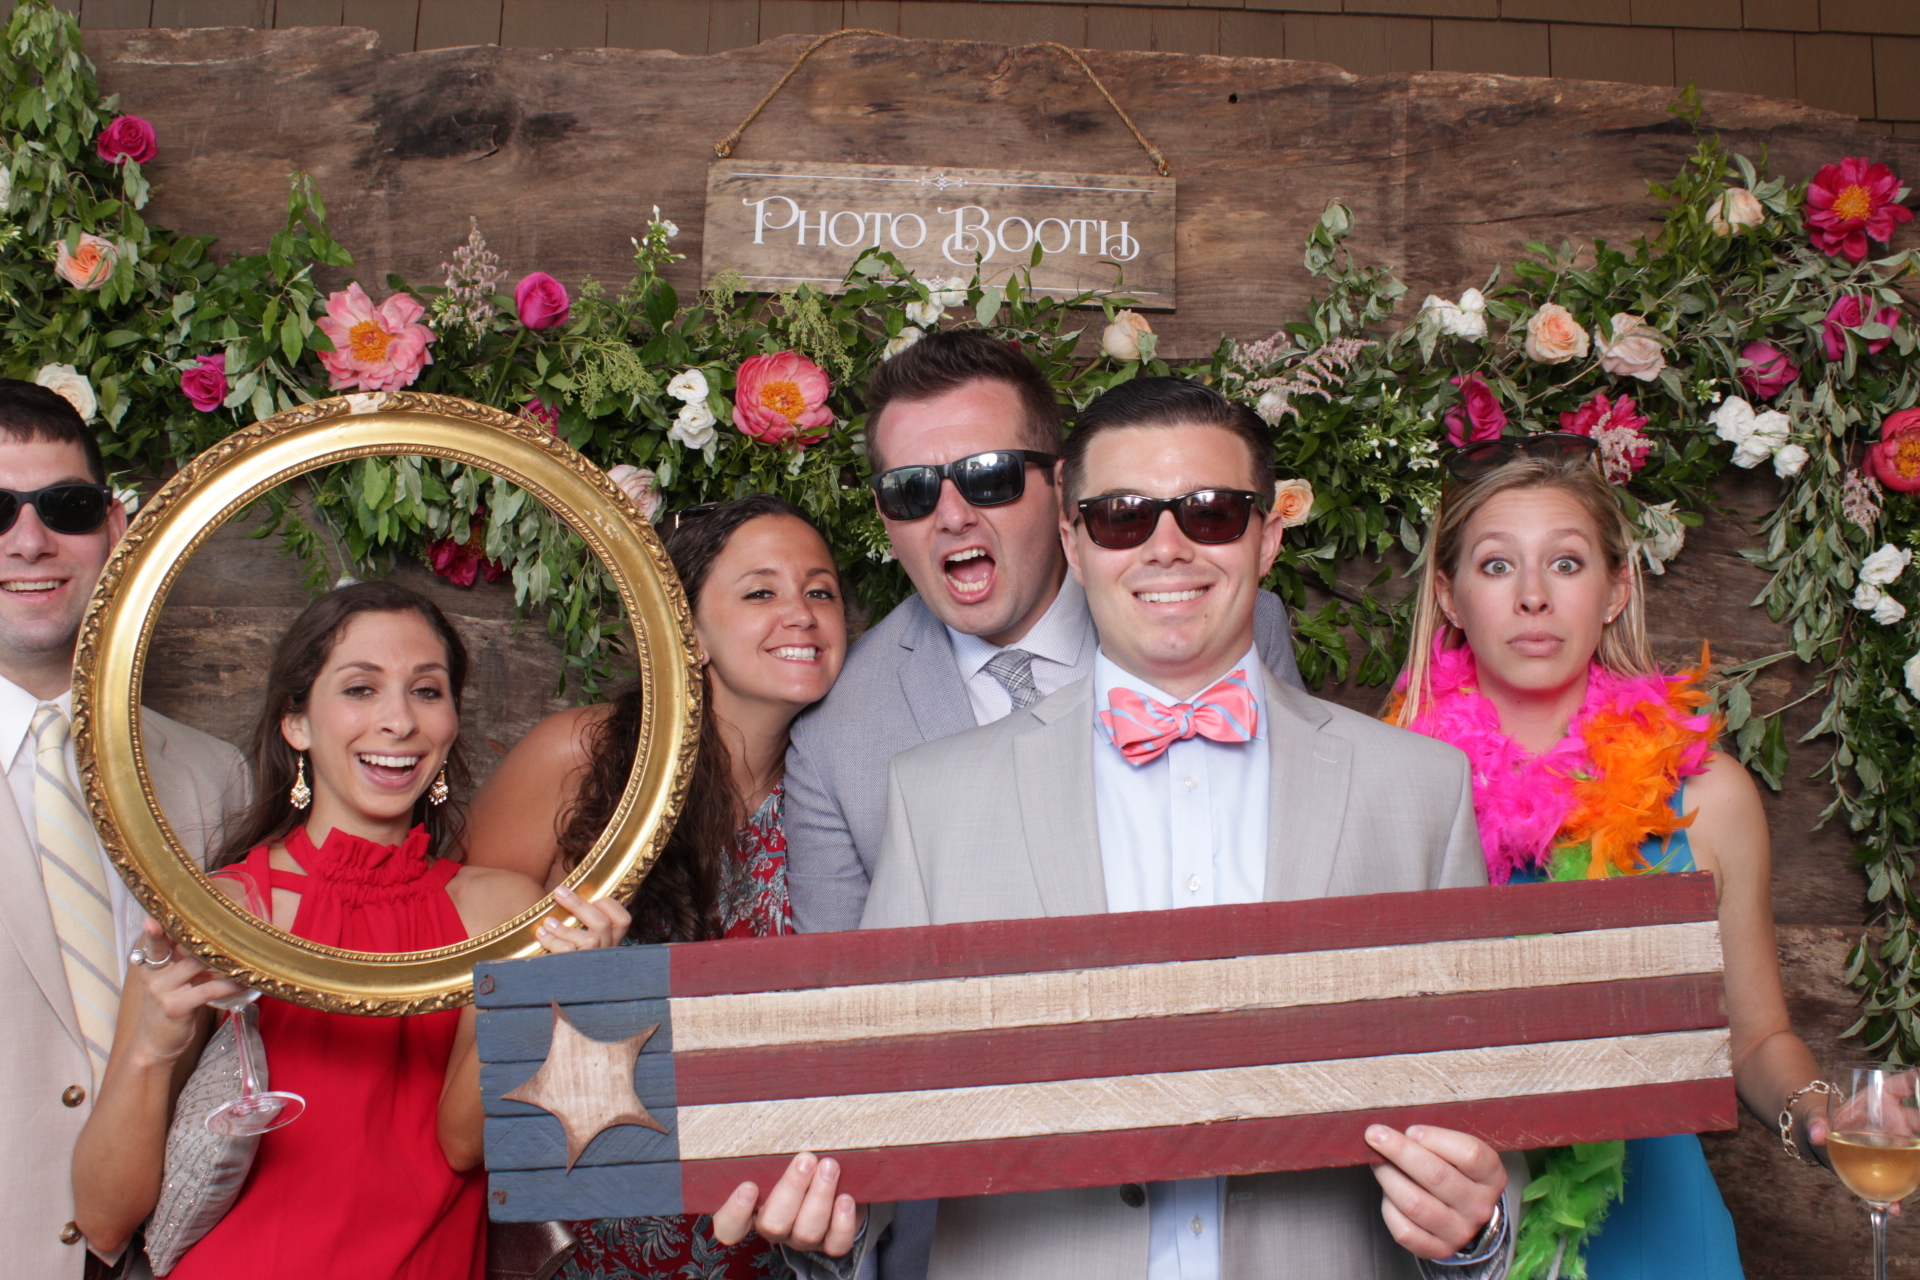 open-air-photo-booth-wedding-party-event-jennifer-peter-5